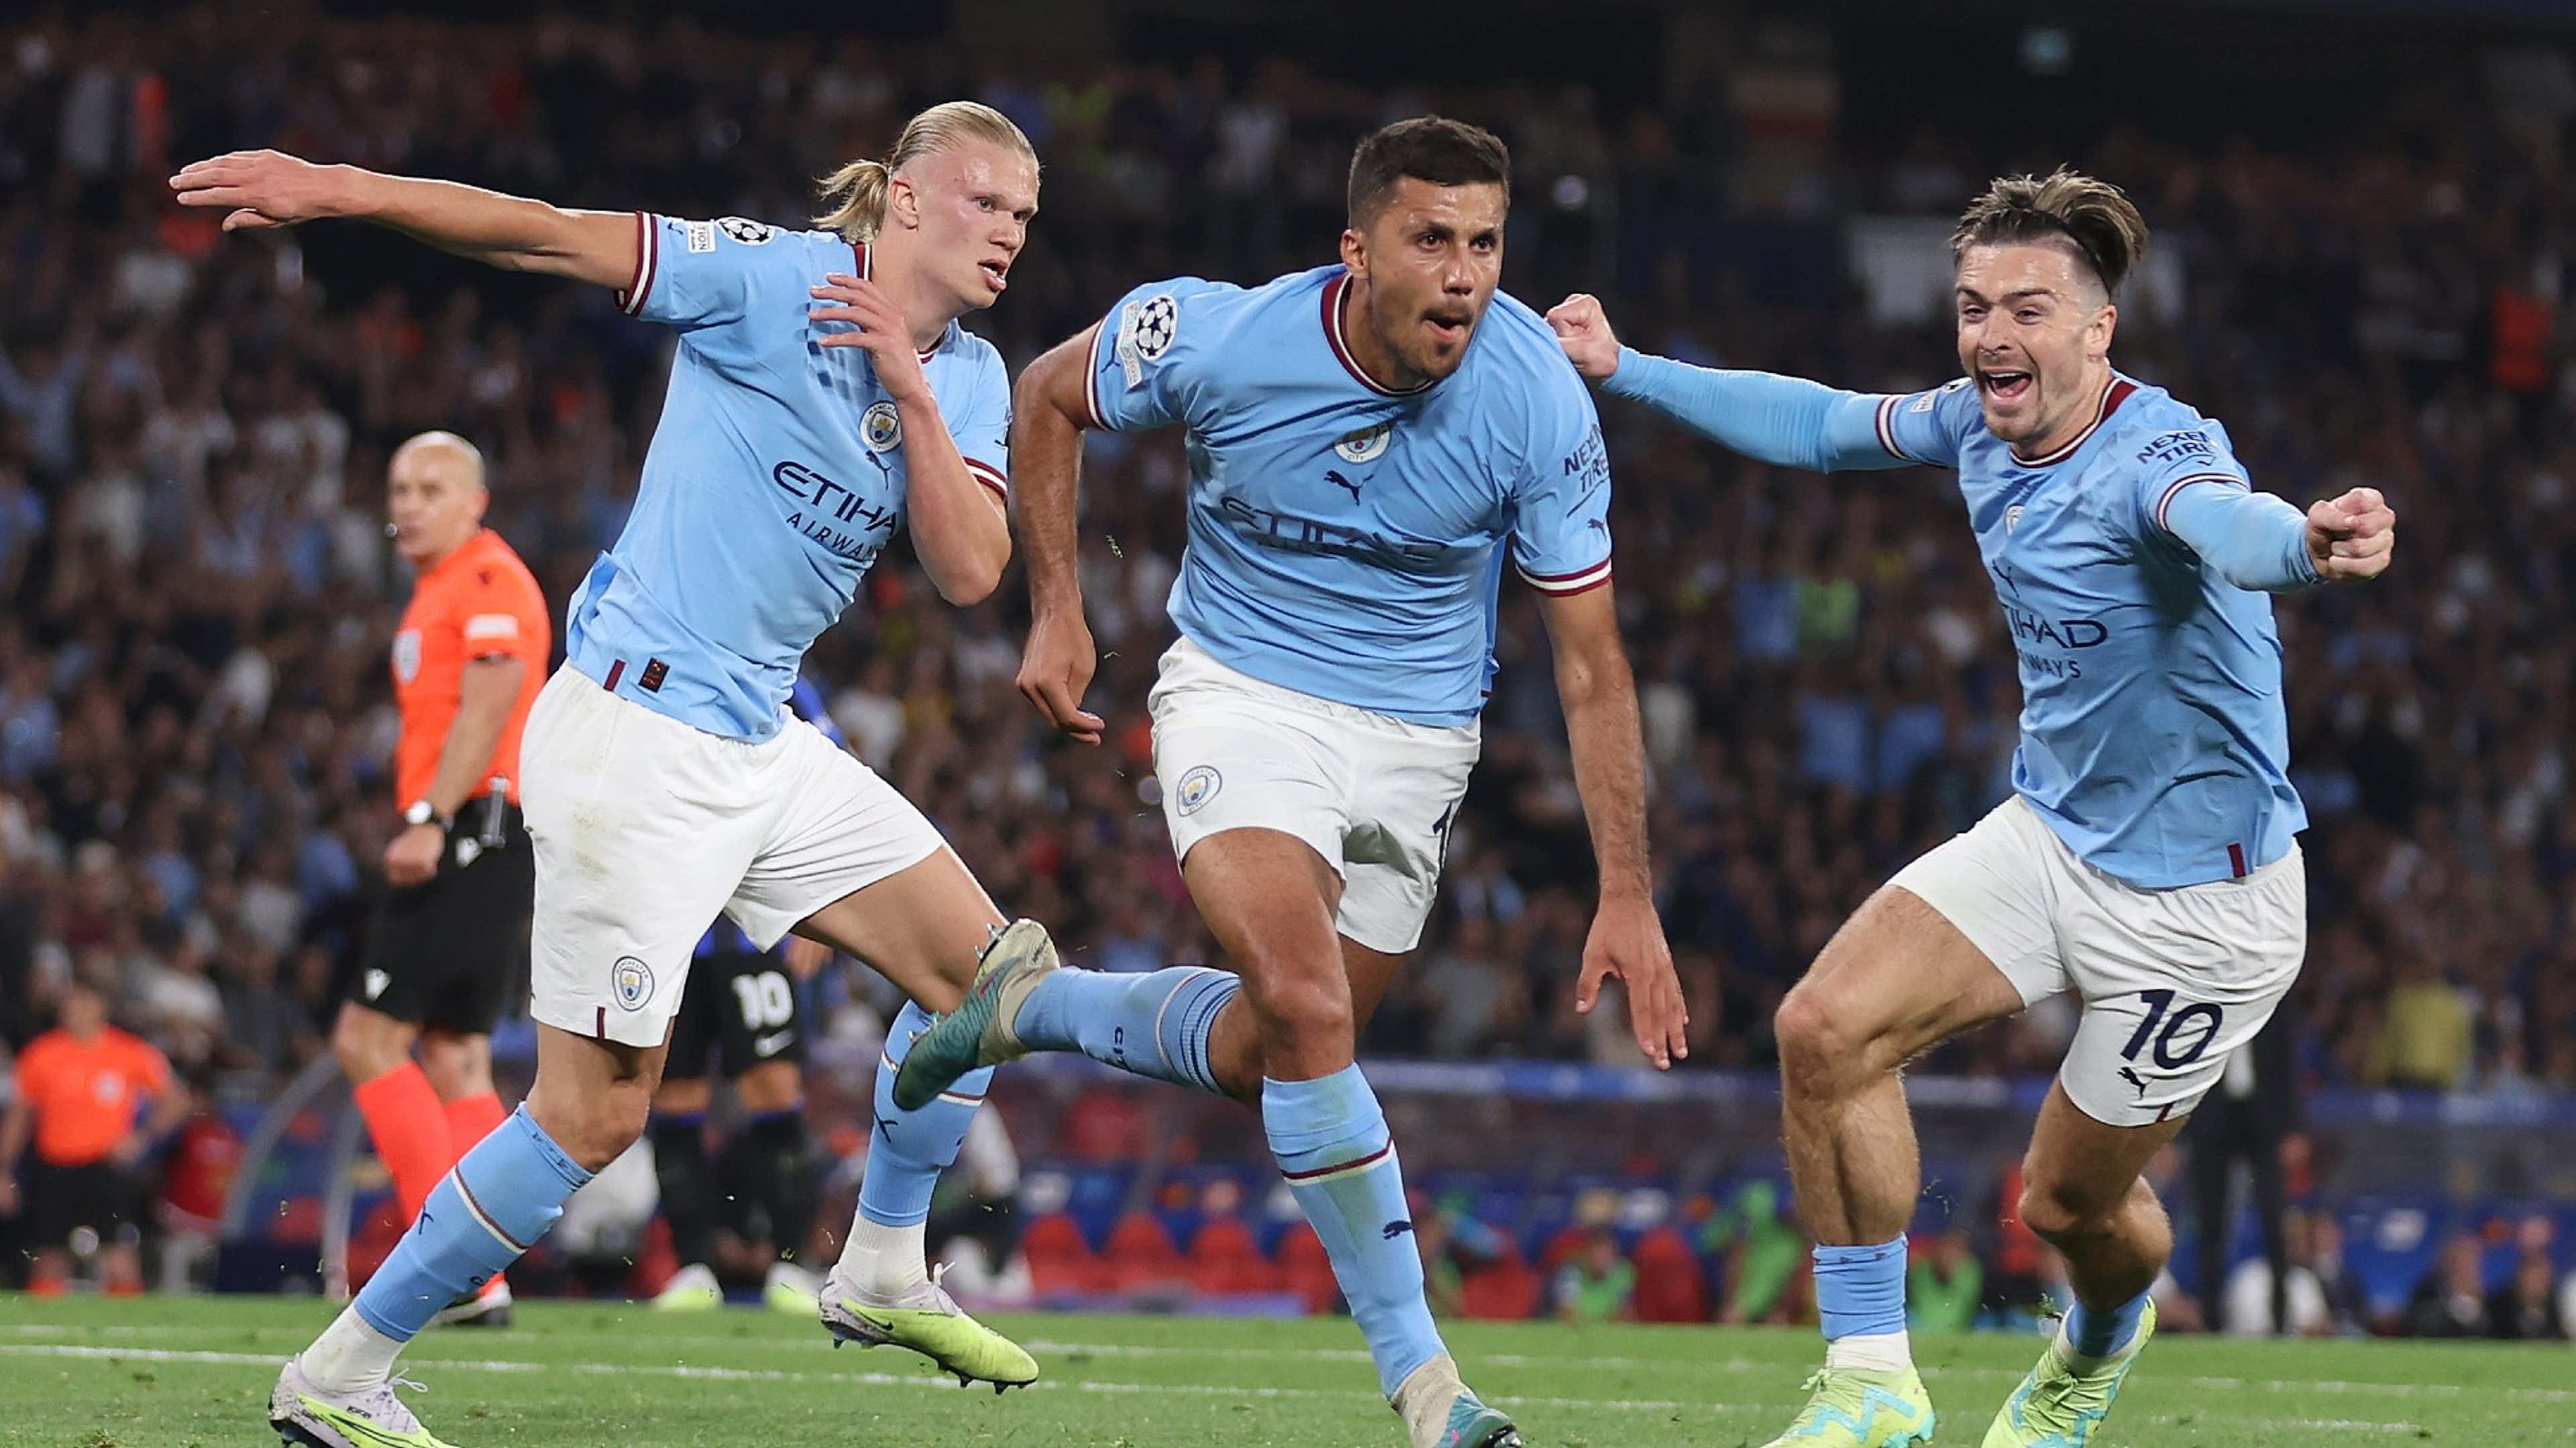  Rodri, a Manchester City midfielder, celebrates a goal with his teammates during a soccer match.